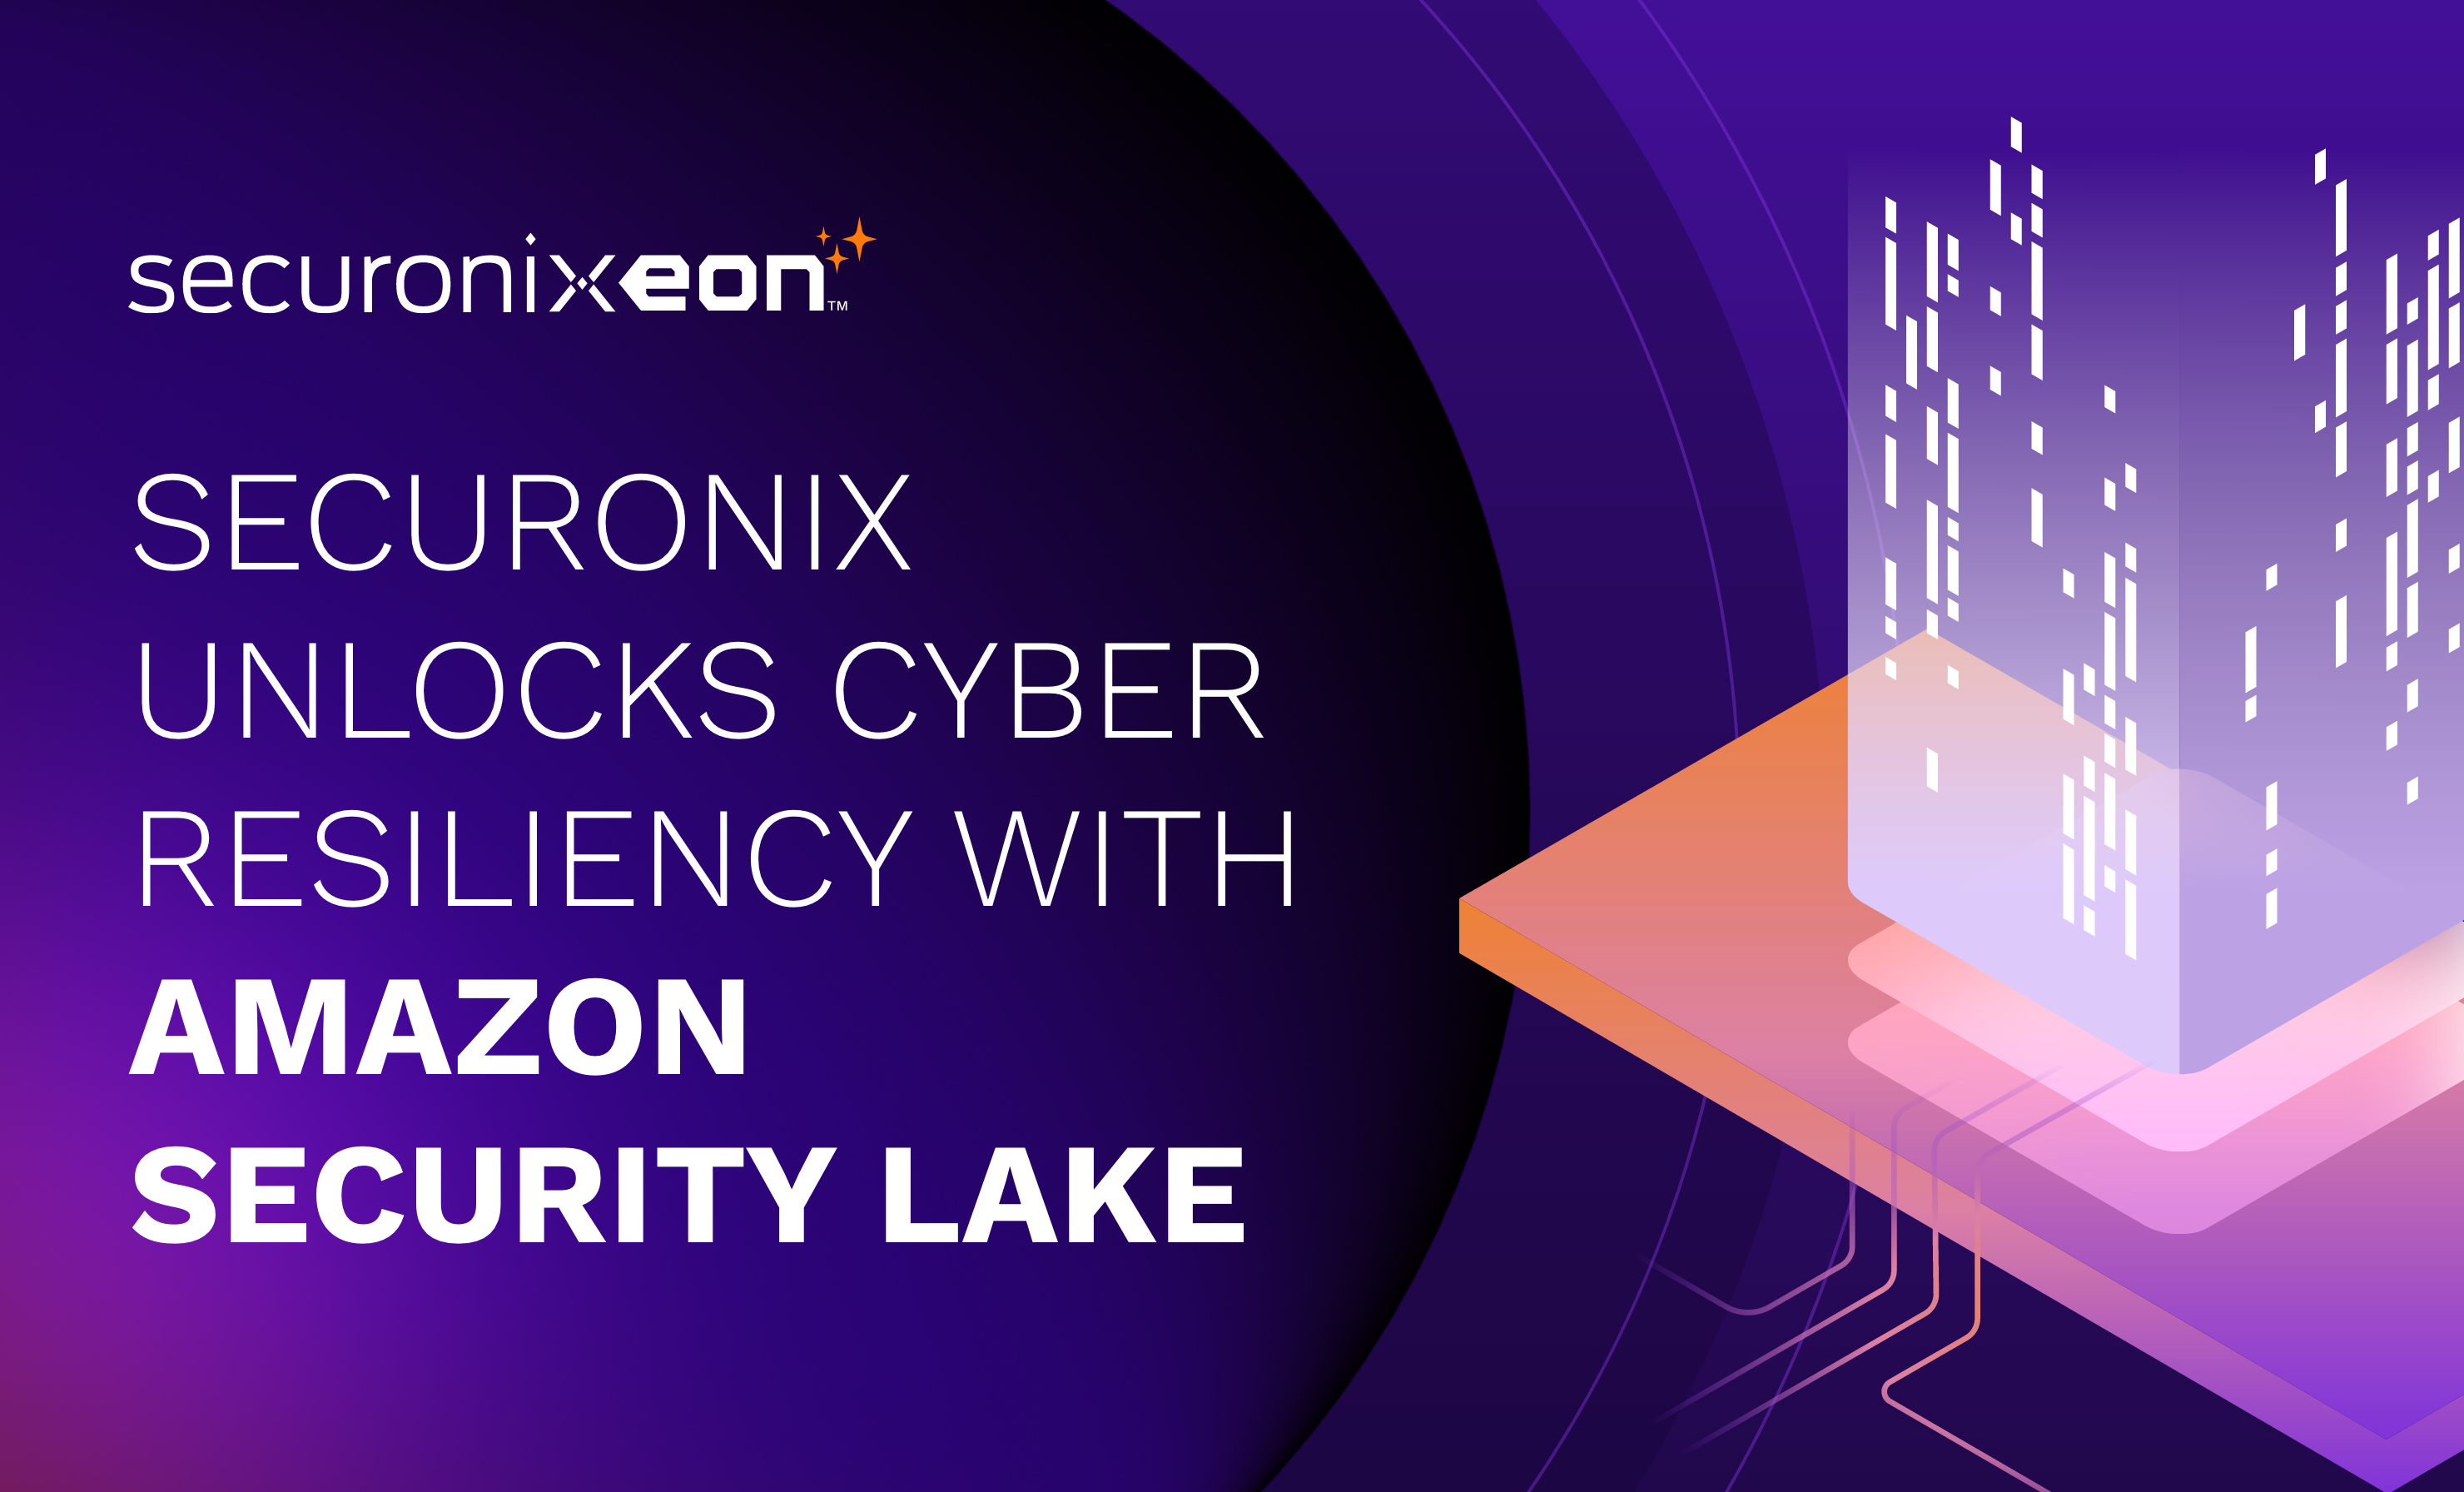 SECURONIX UNLOCKS CYBER RESILIENCY WITH AMAZON SECURITY LAKE